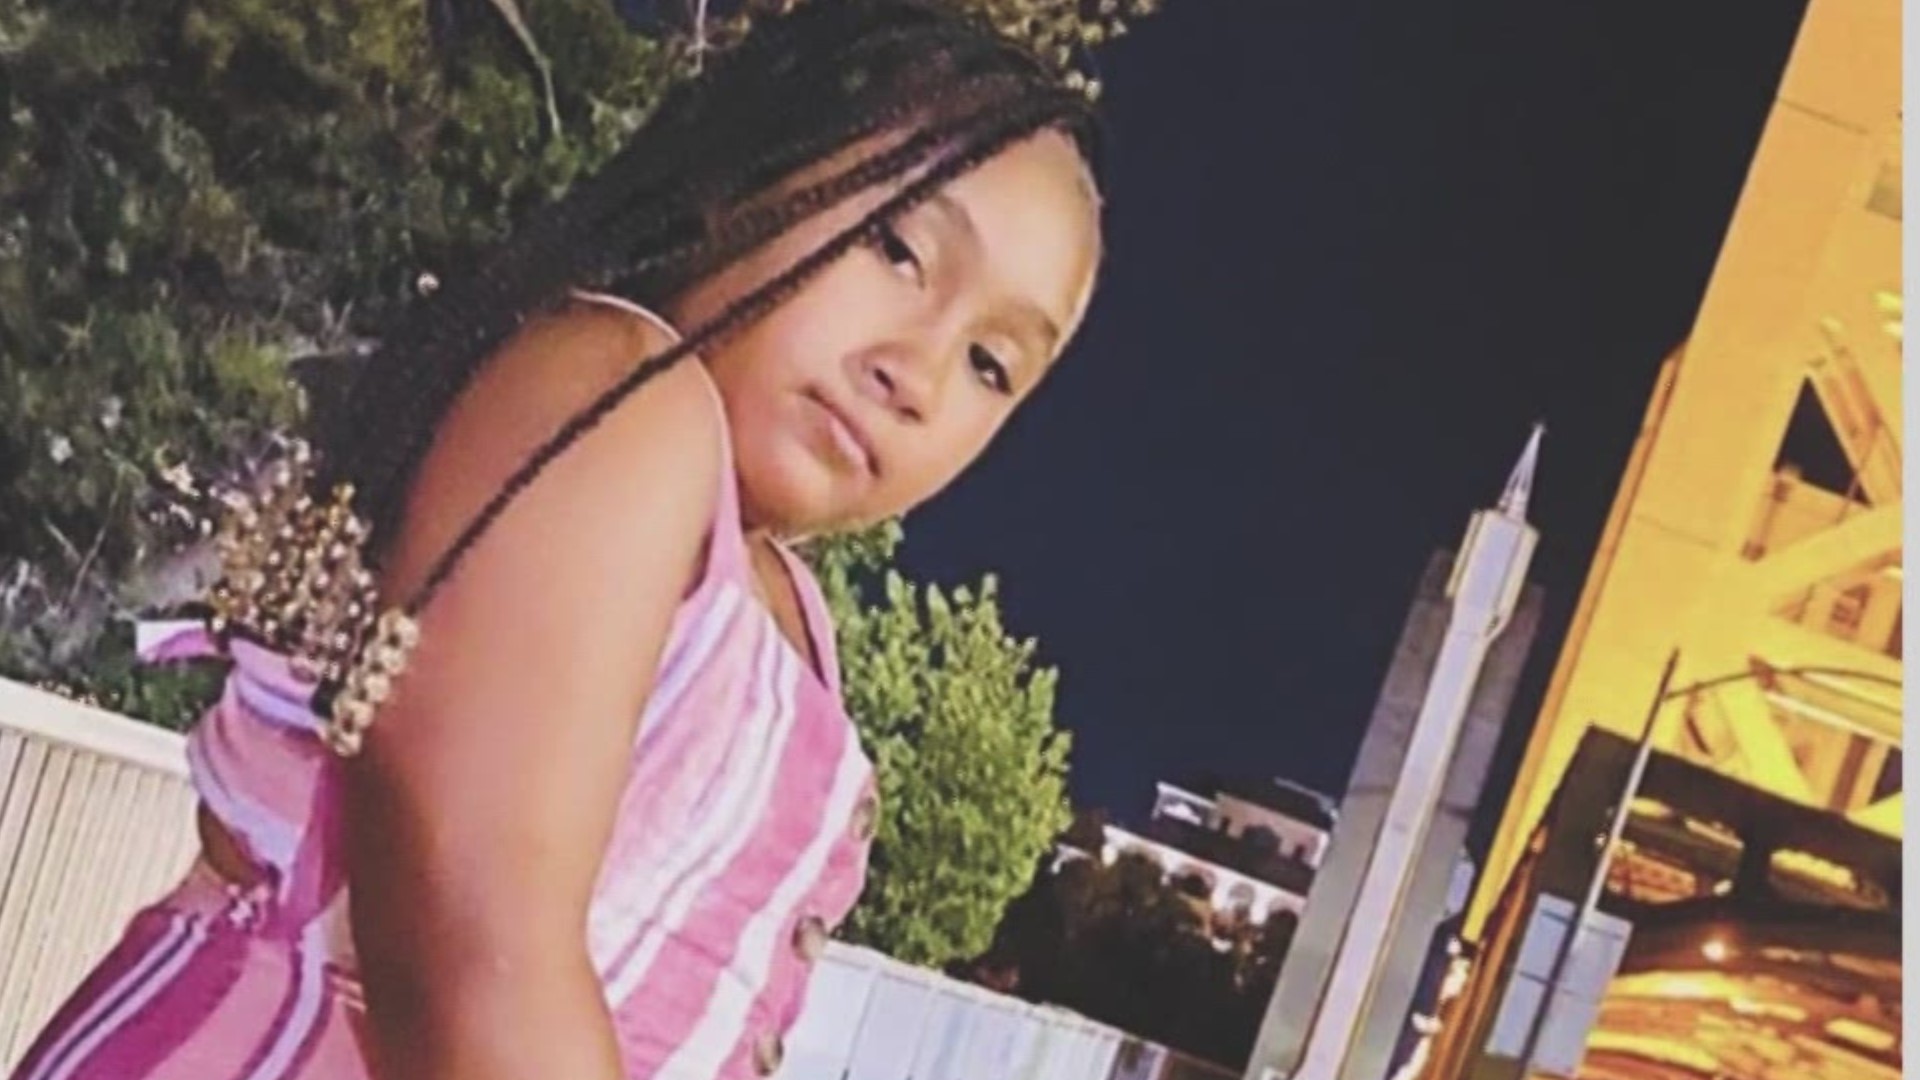 Makaylah Brent, 9, was killed while playing at Mama Marks Park in North Sacramento, during a violent weekend in early October.